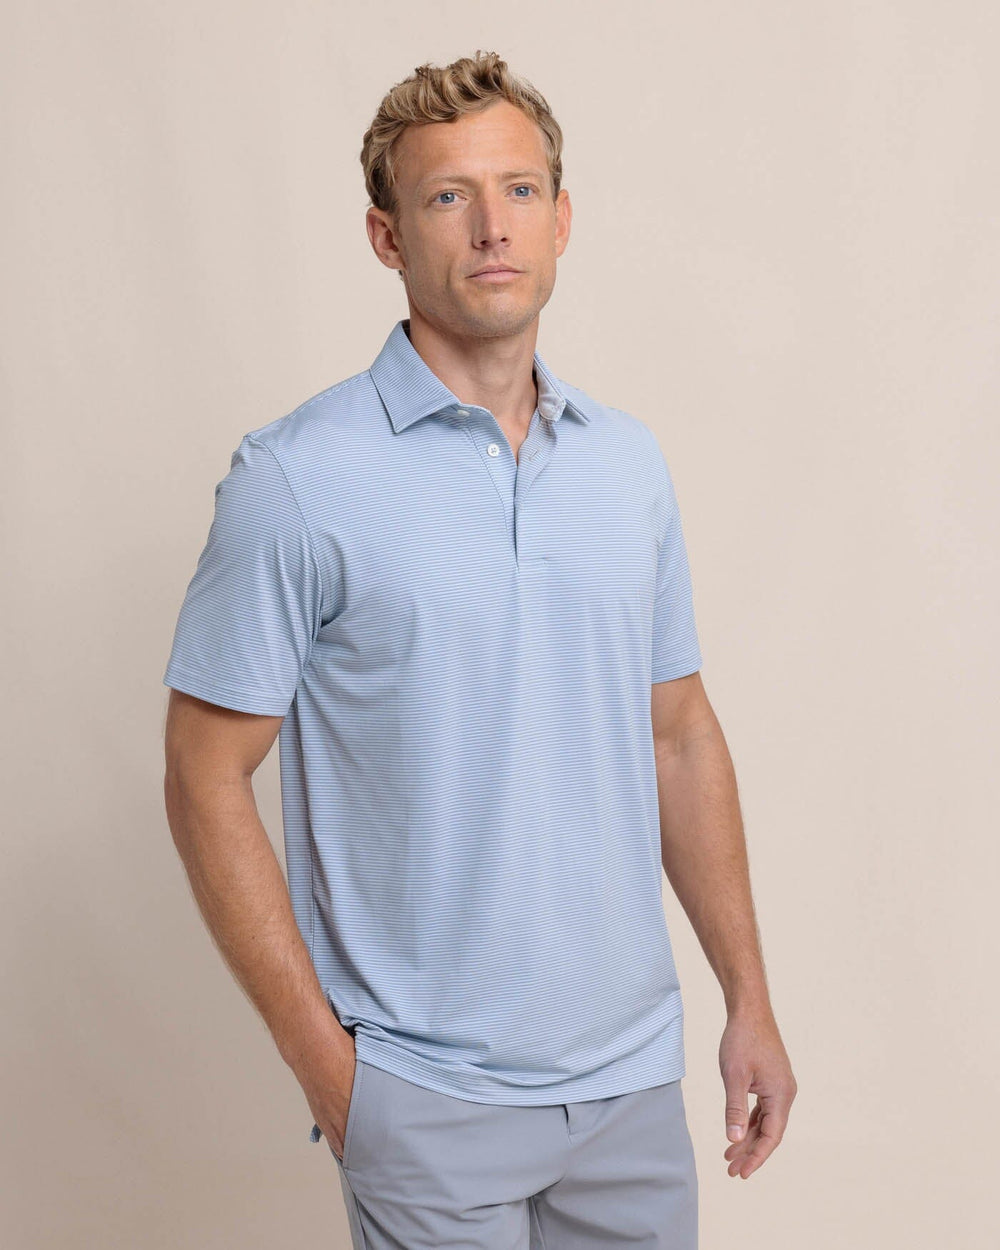 The front view of the Southern Tide brrr-eeze Meadowbrook Stripe Polo by Southern Tide - Triumph Blue